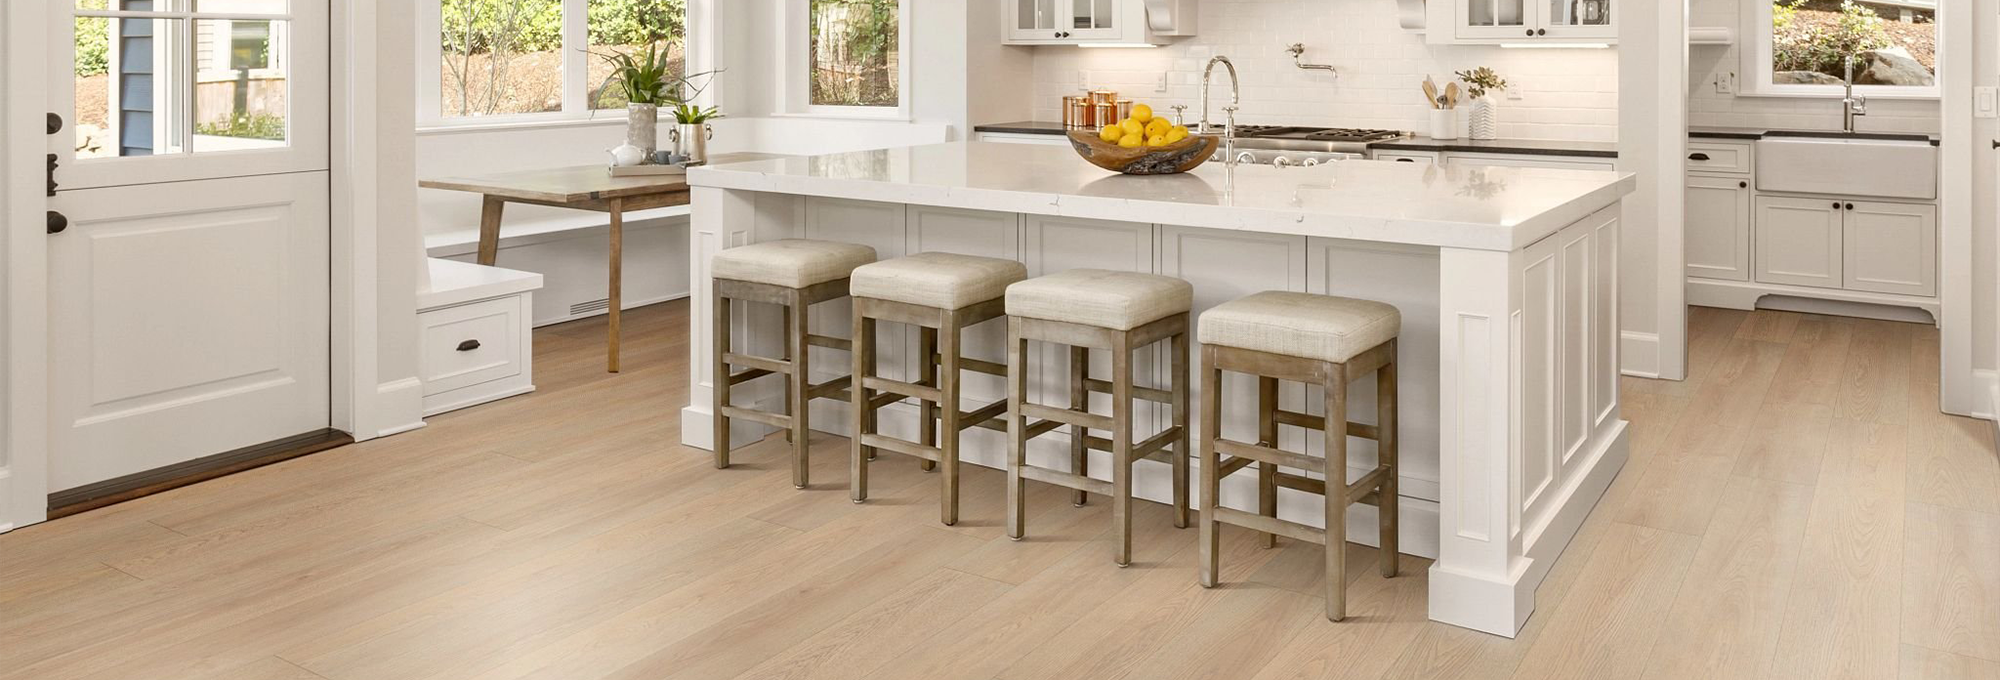 white kitchen island with brown vinyl floor from Michaels Carpets Huntington Beach in Huntington Beach, CA